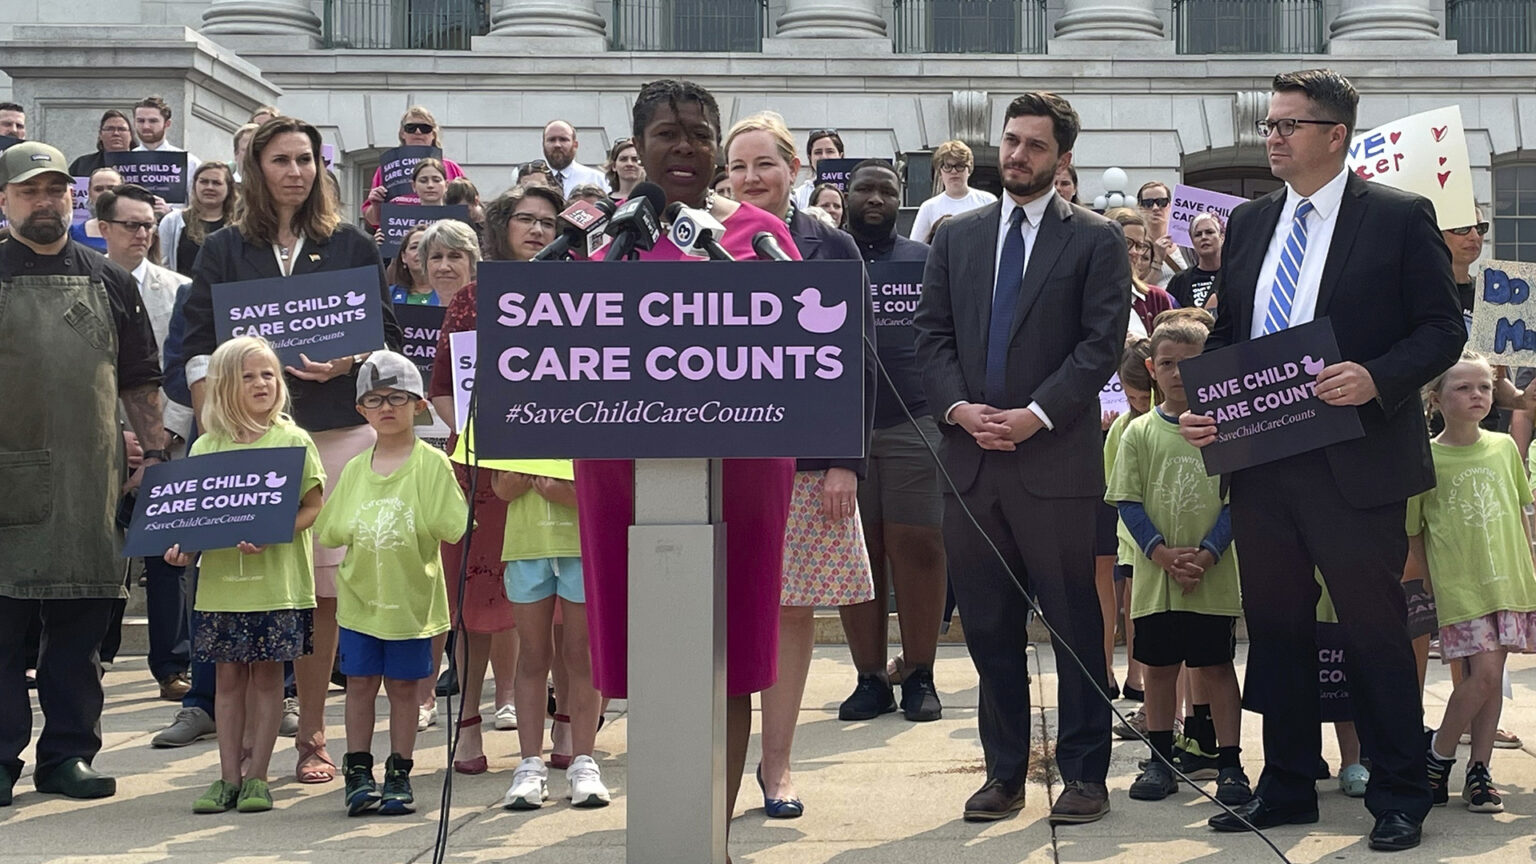 LaTonya Johnson stands and speaks into multiple microphones mounted on a podium affixed with a sign reading Save Child Care Counts, with other adults and children standing to her side and behind, with several holding printed signs with the same slogan and hand-drawn signs, in front of a masonry building.